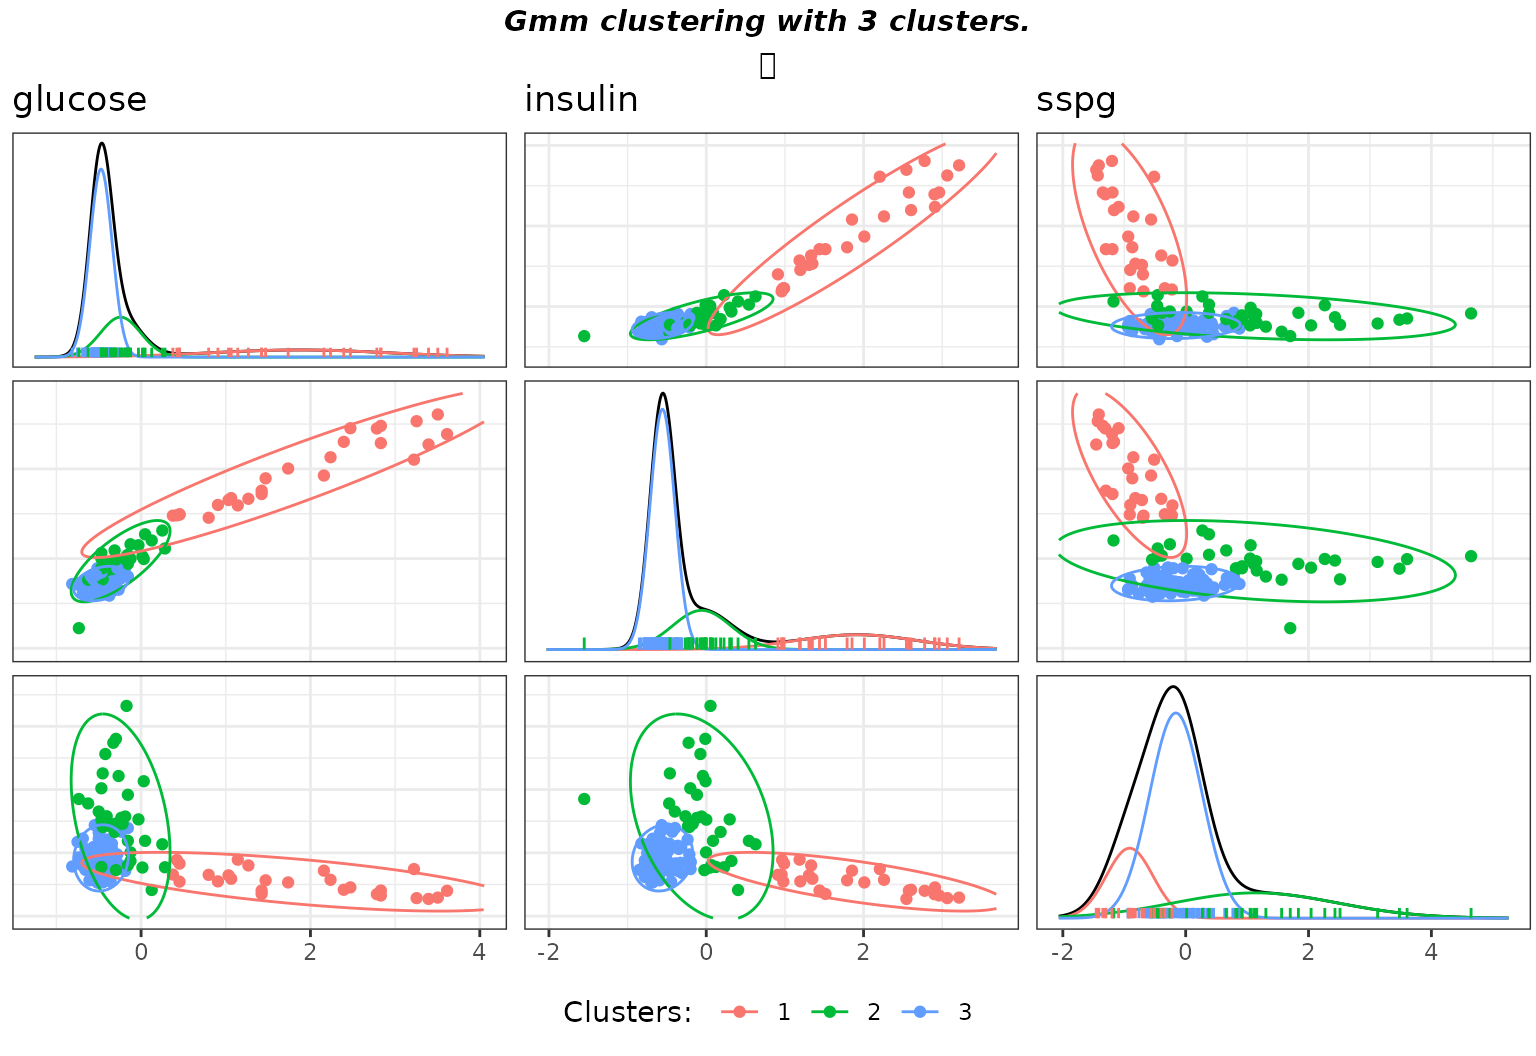 Matrix pairs plots of the clustering with default hyperparameters on the diabetes data.